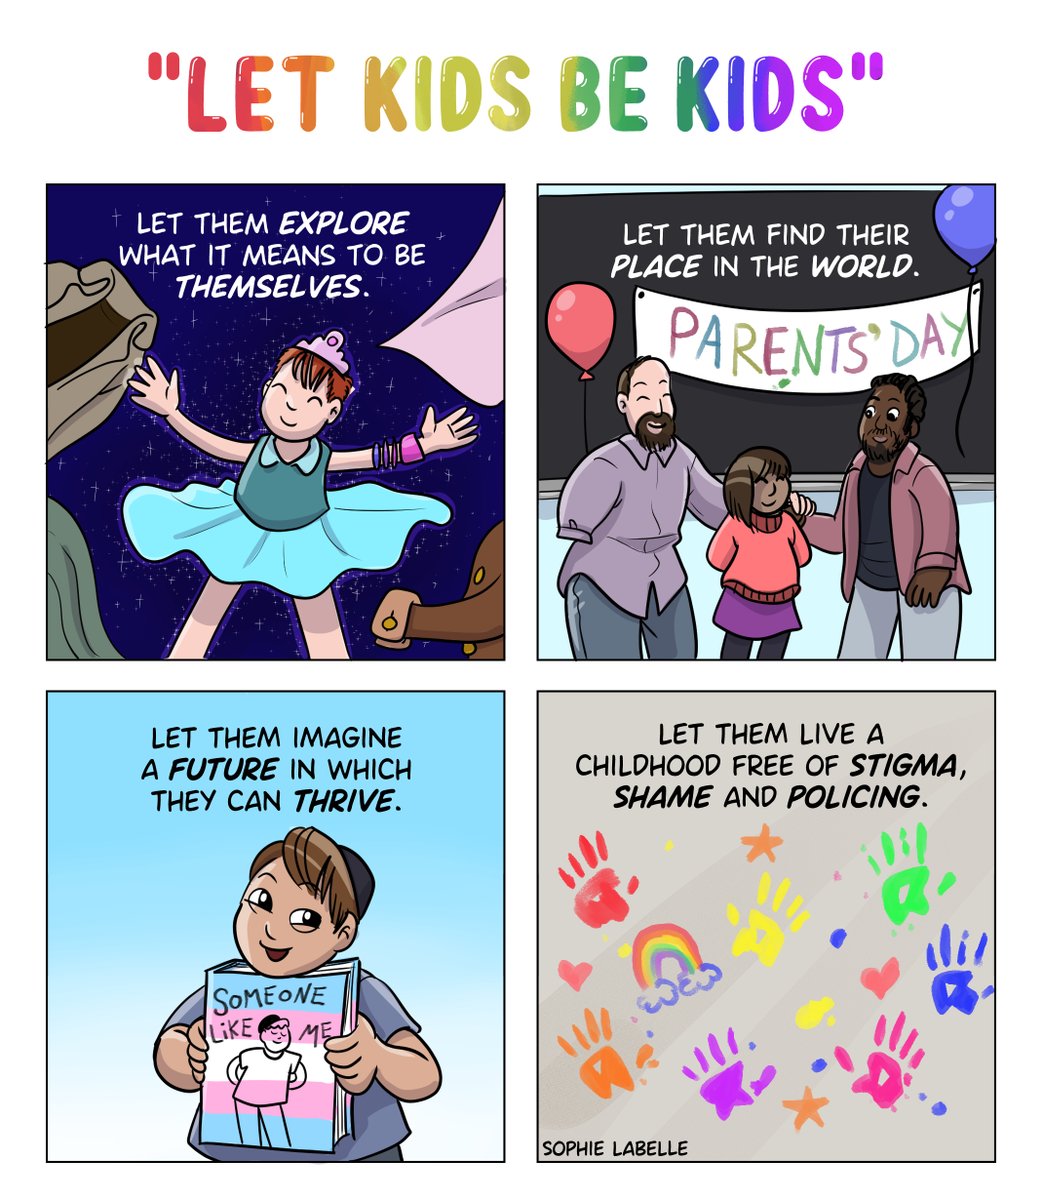 Let kids be kids. Especially the ones who were forced to hold hateful signs yesterday across Canada.